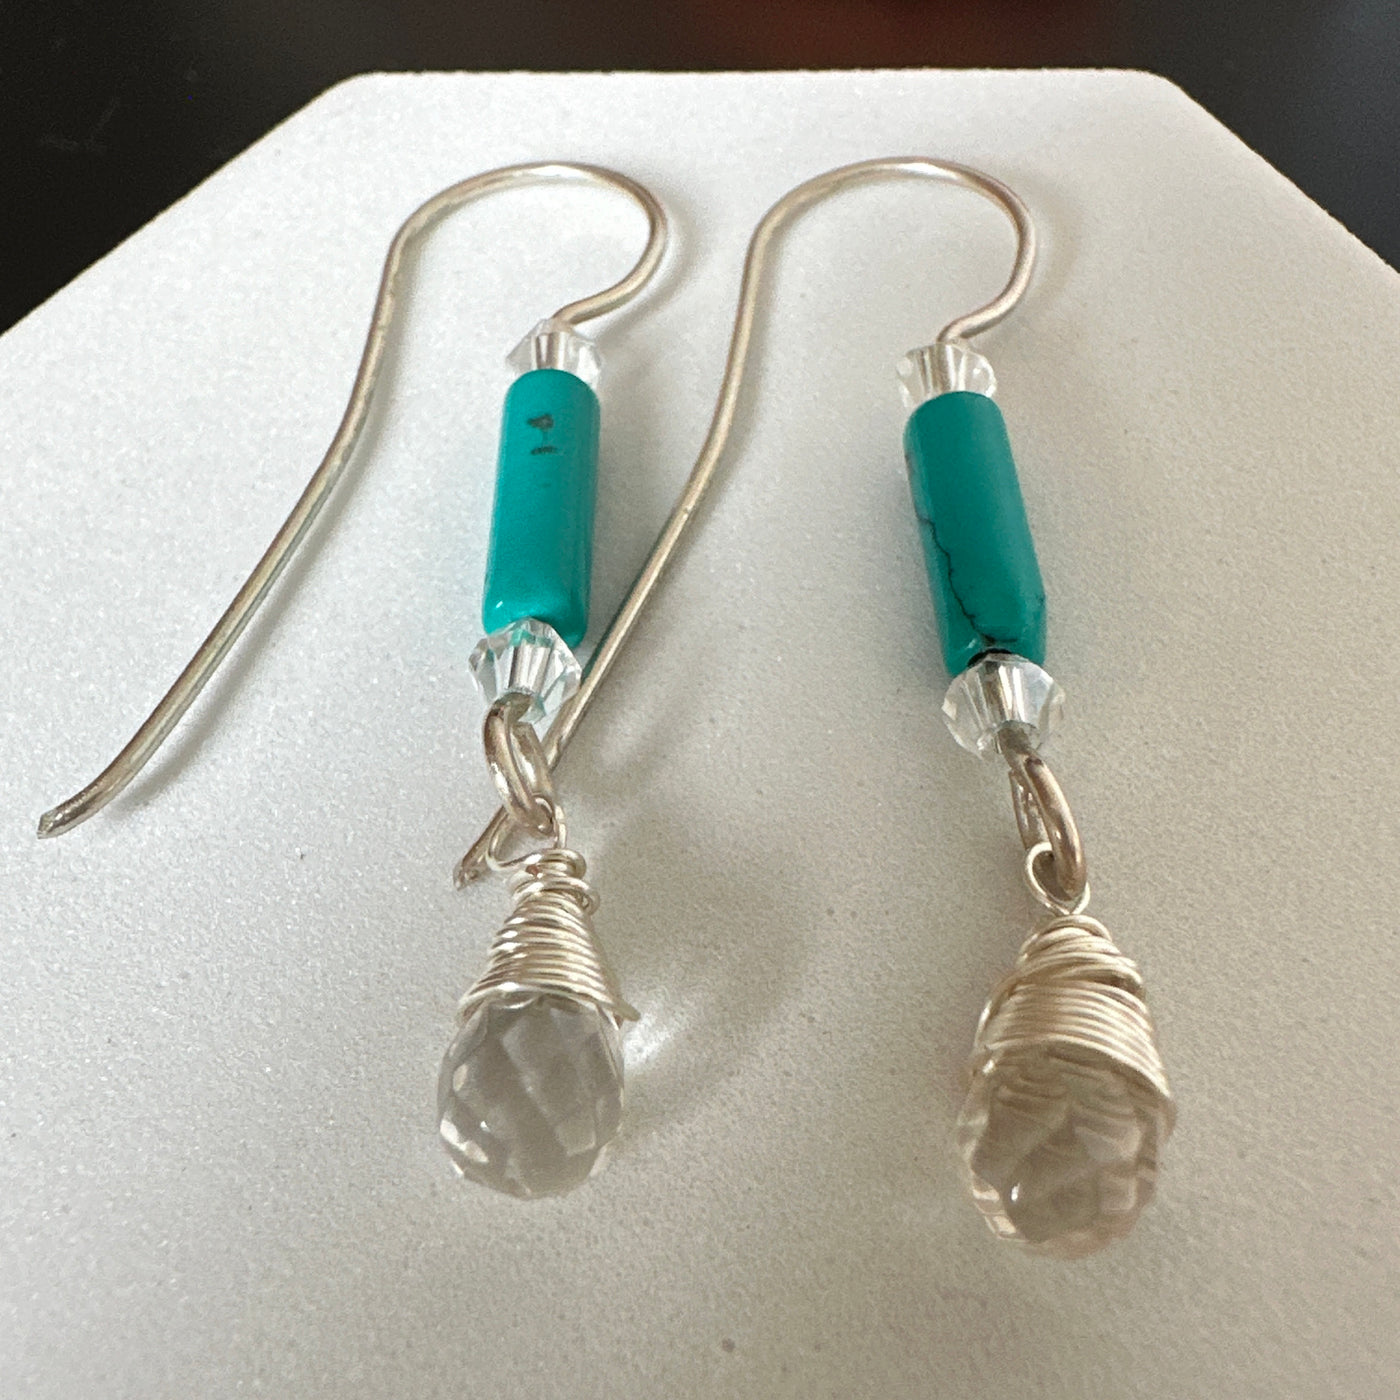 Silver earrings with turquoise and pear shaped wrapped quartz